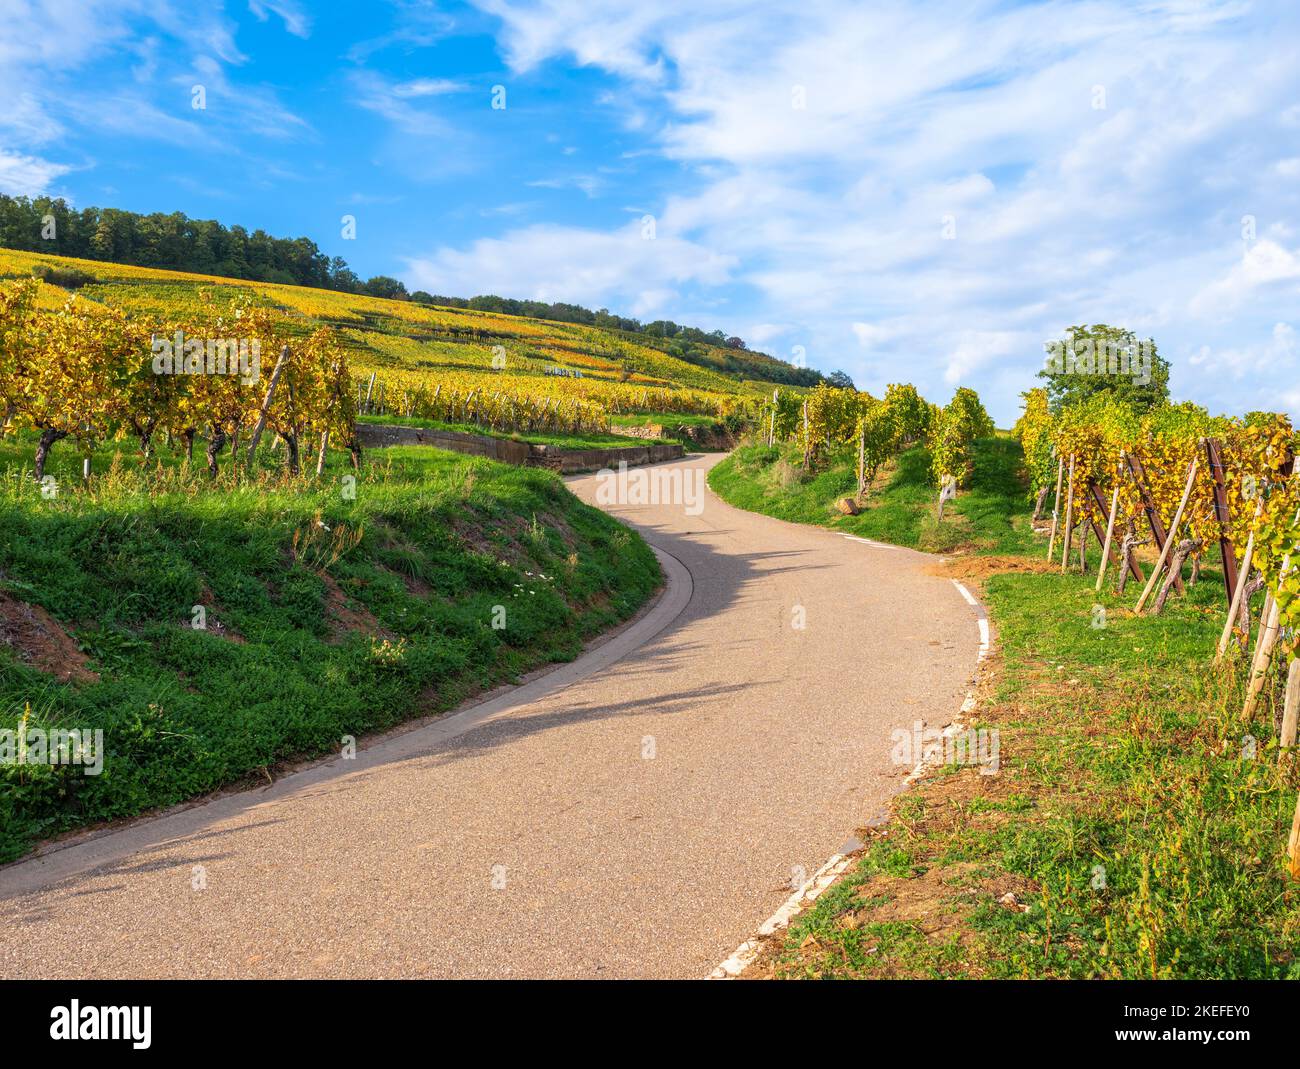 Vineyards along the famous wine route in Alsace, France Stock Photo